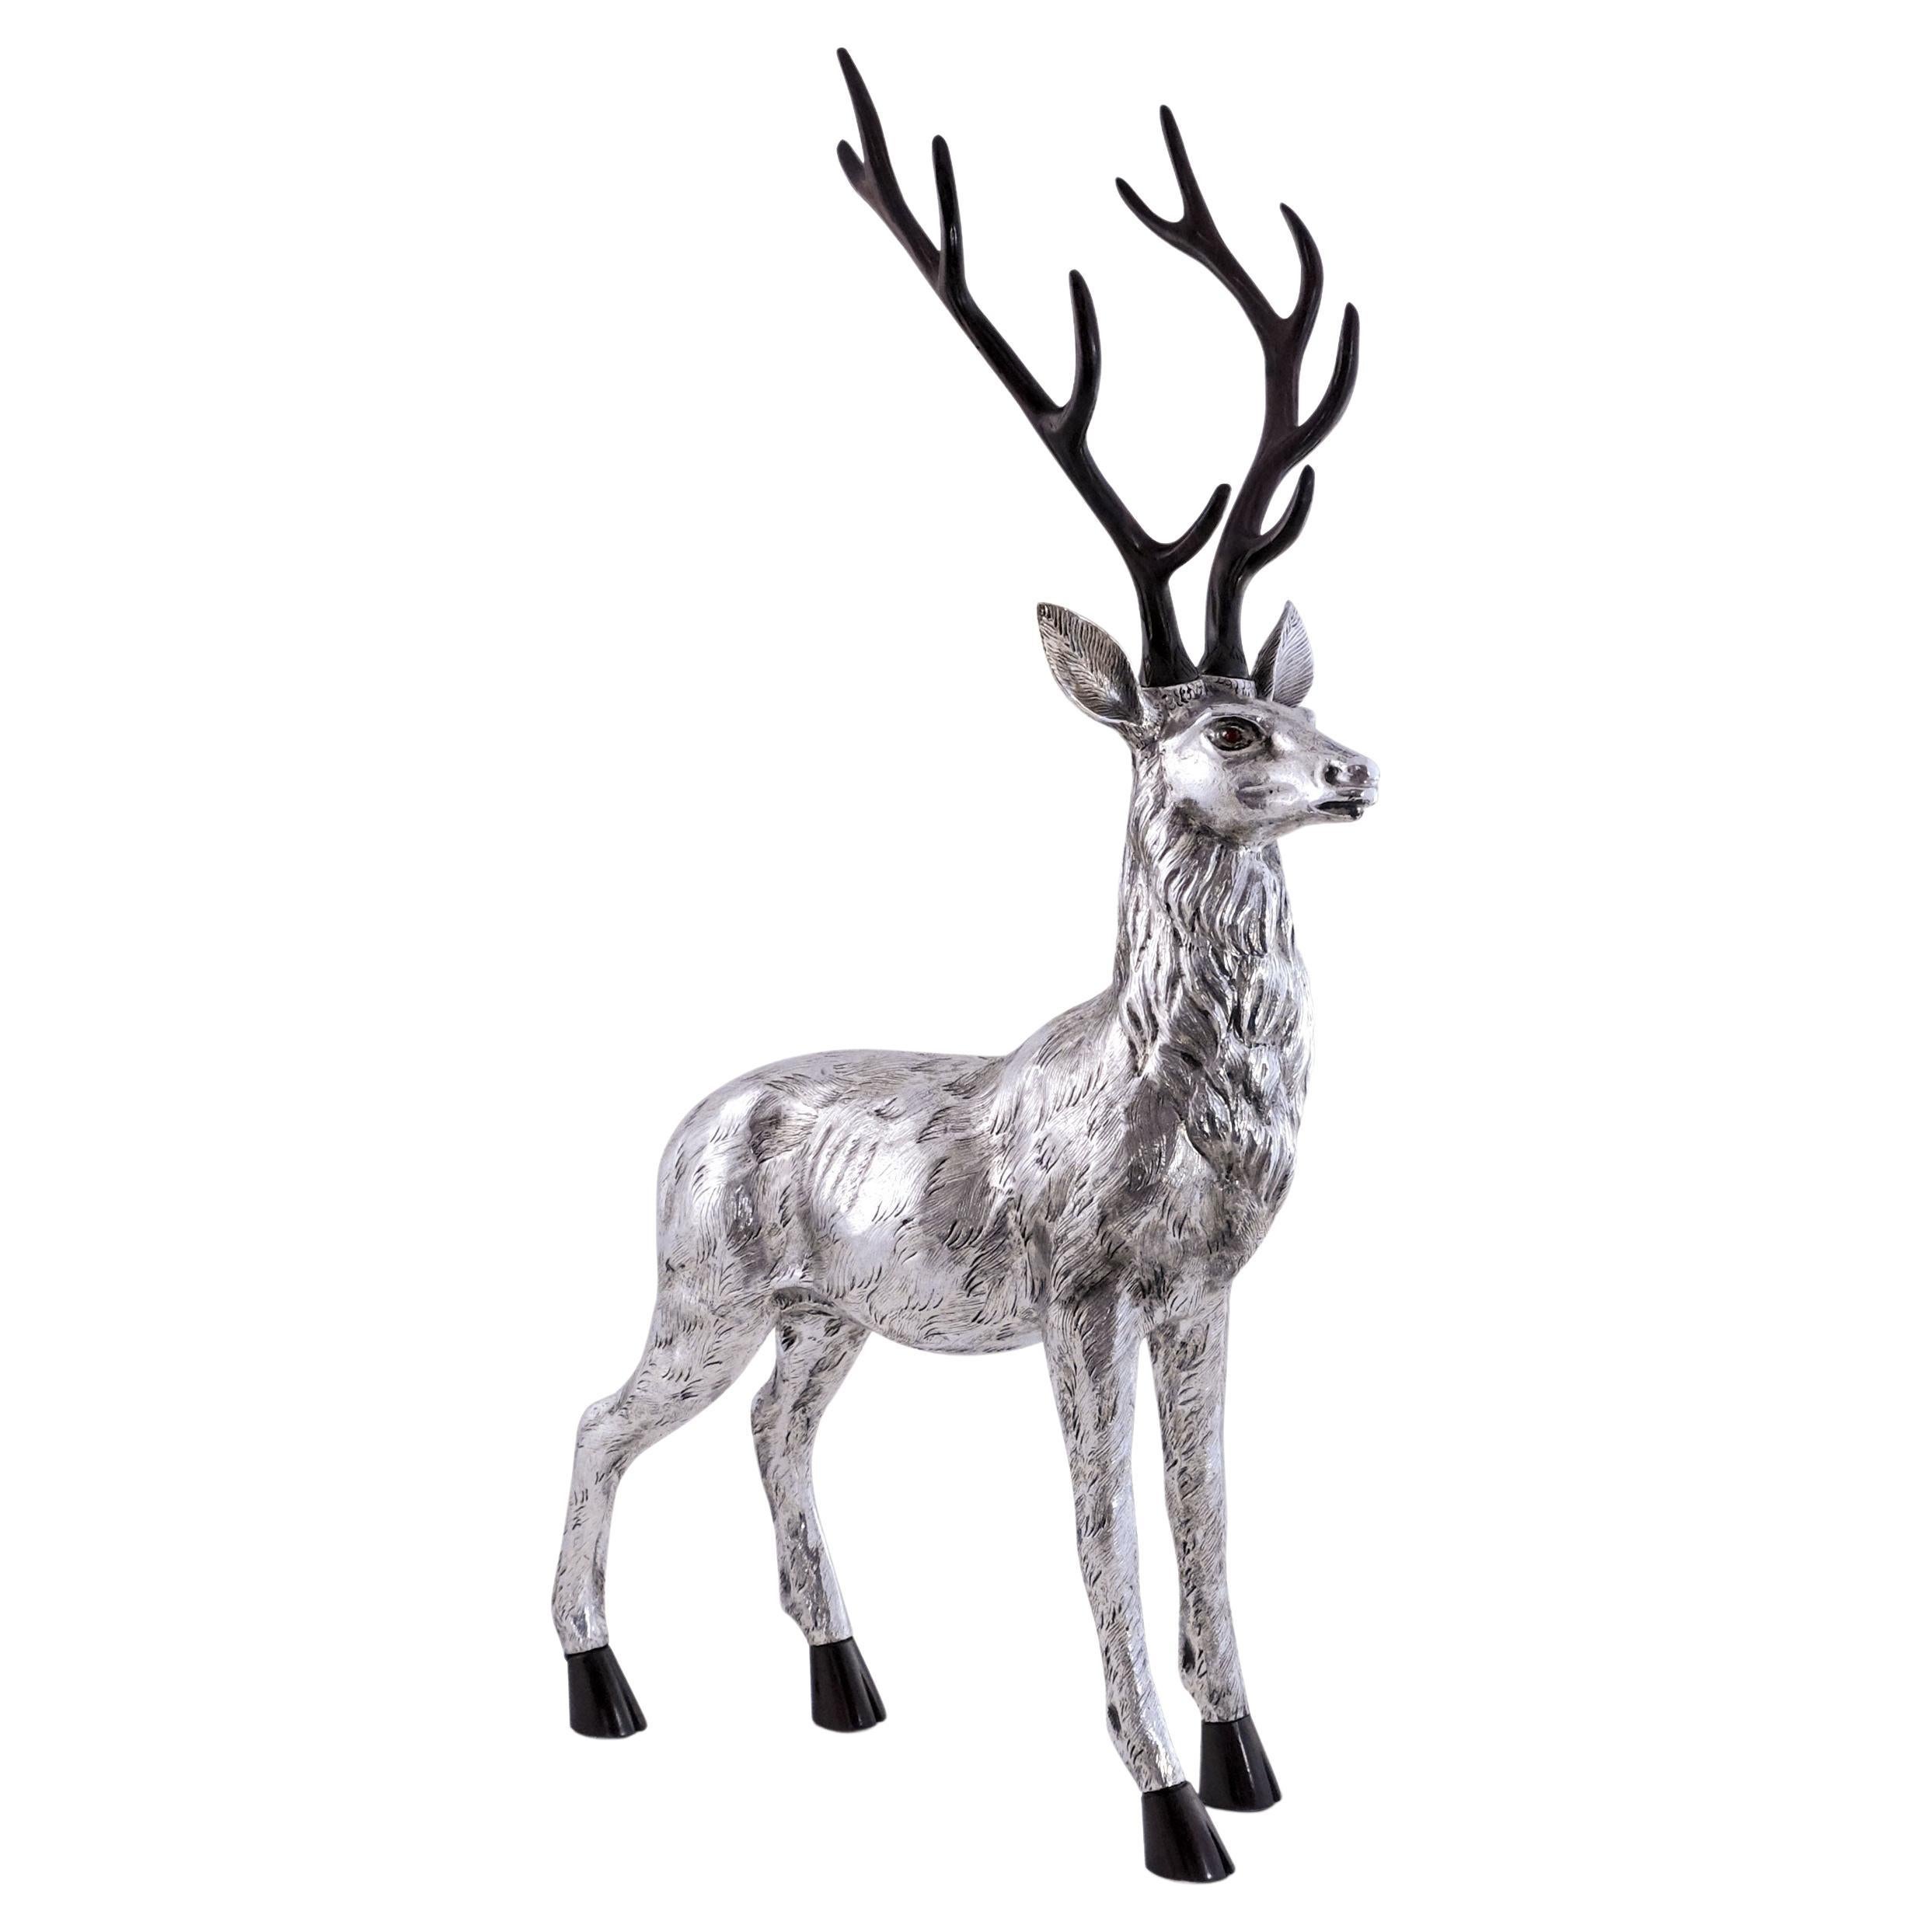 Deer by Alcino Silversmith Handcrafted in Sterling Silver with Jacaranda Wood